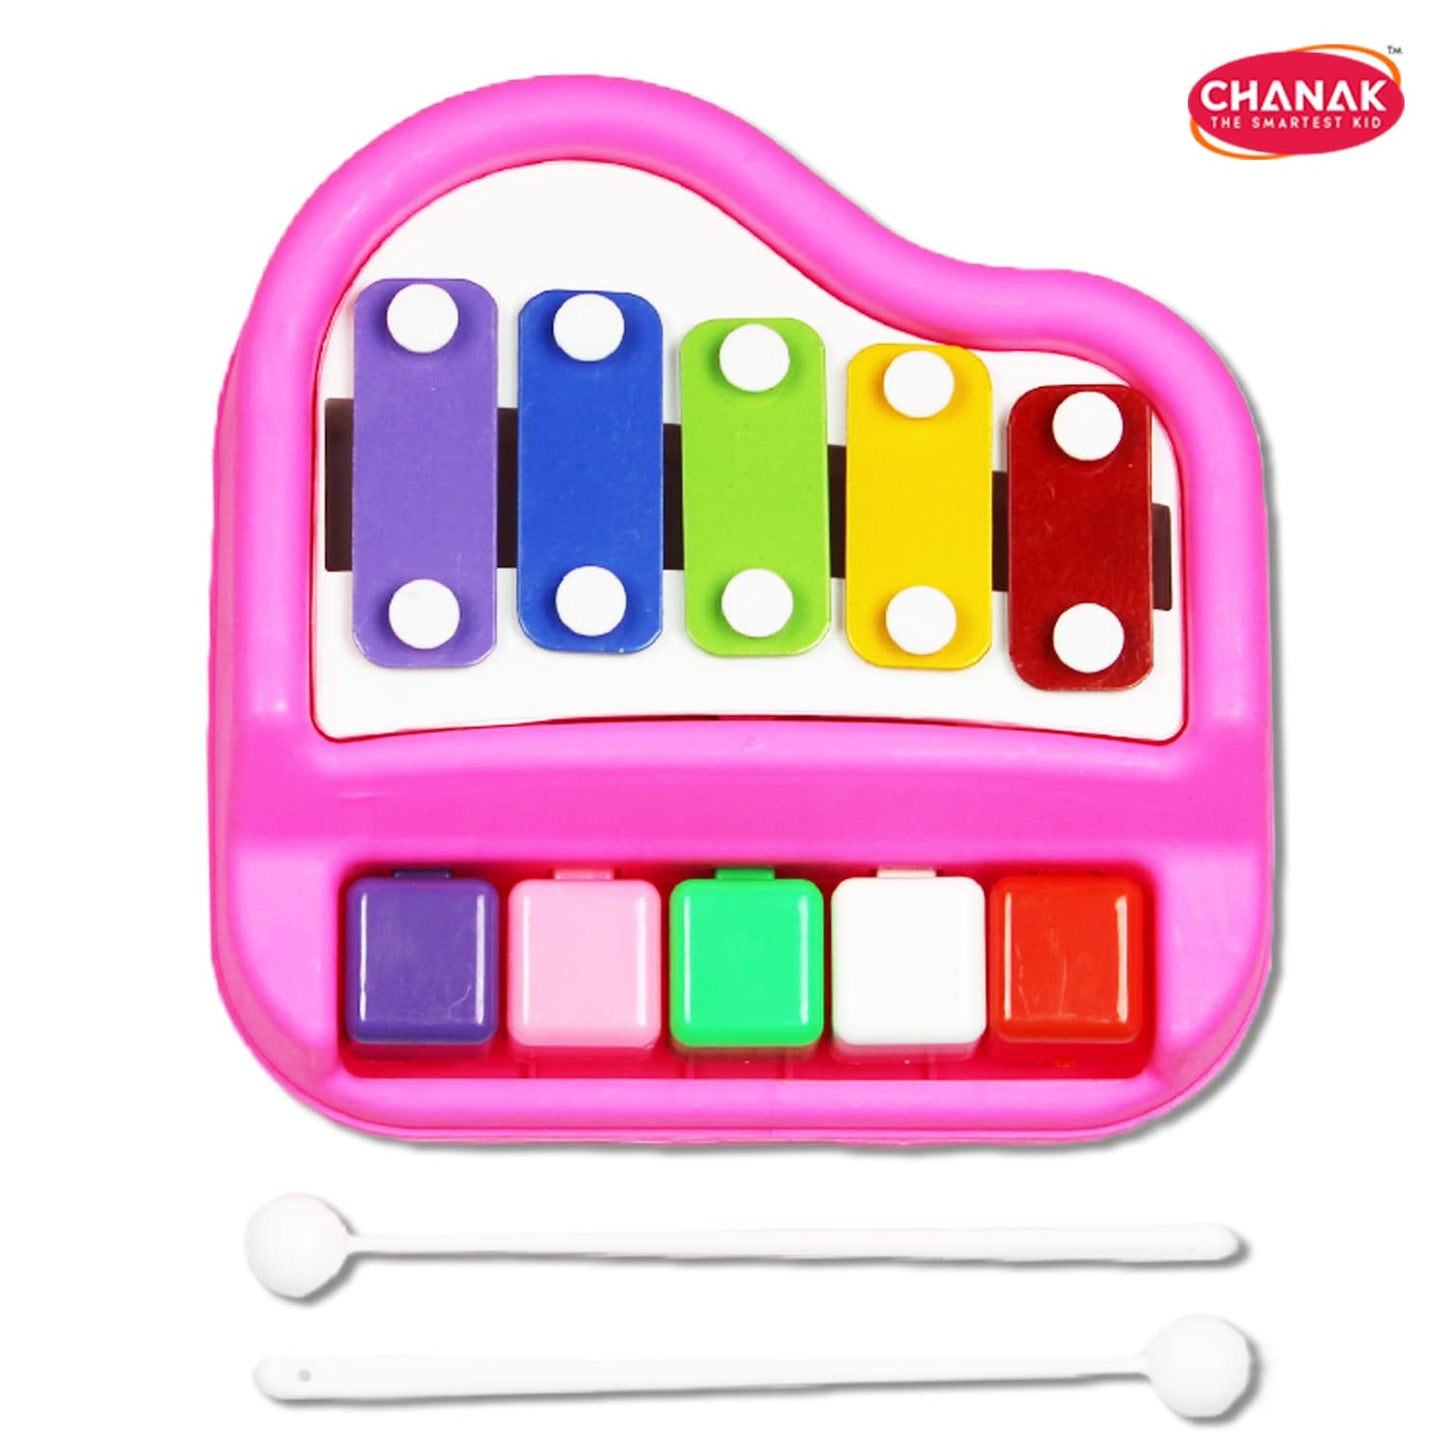 Chanak Musical Xylophone Piano Toy for Kids (Pink)